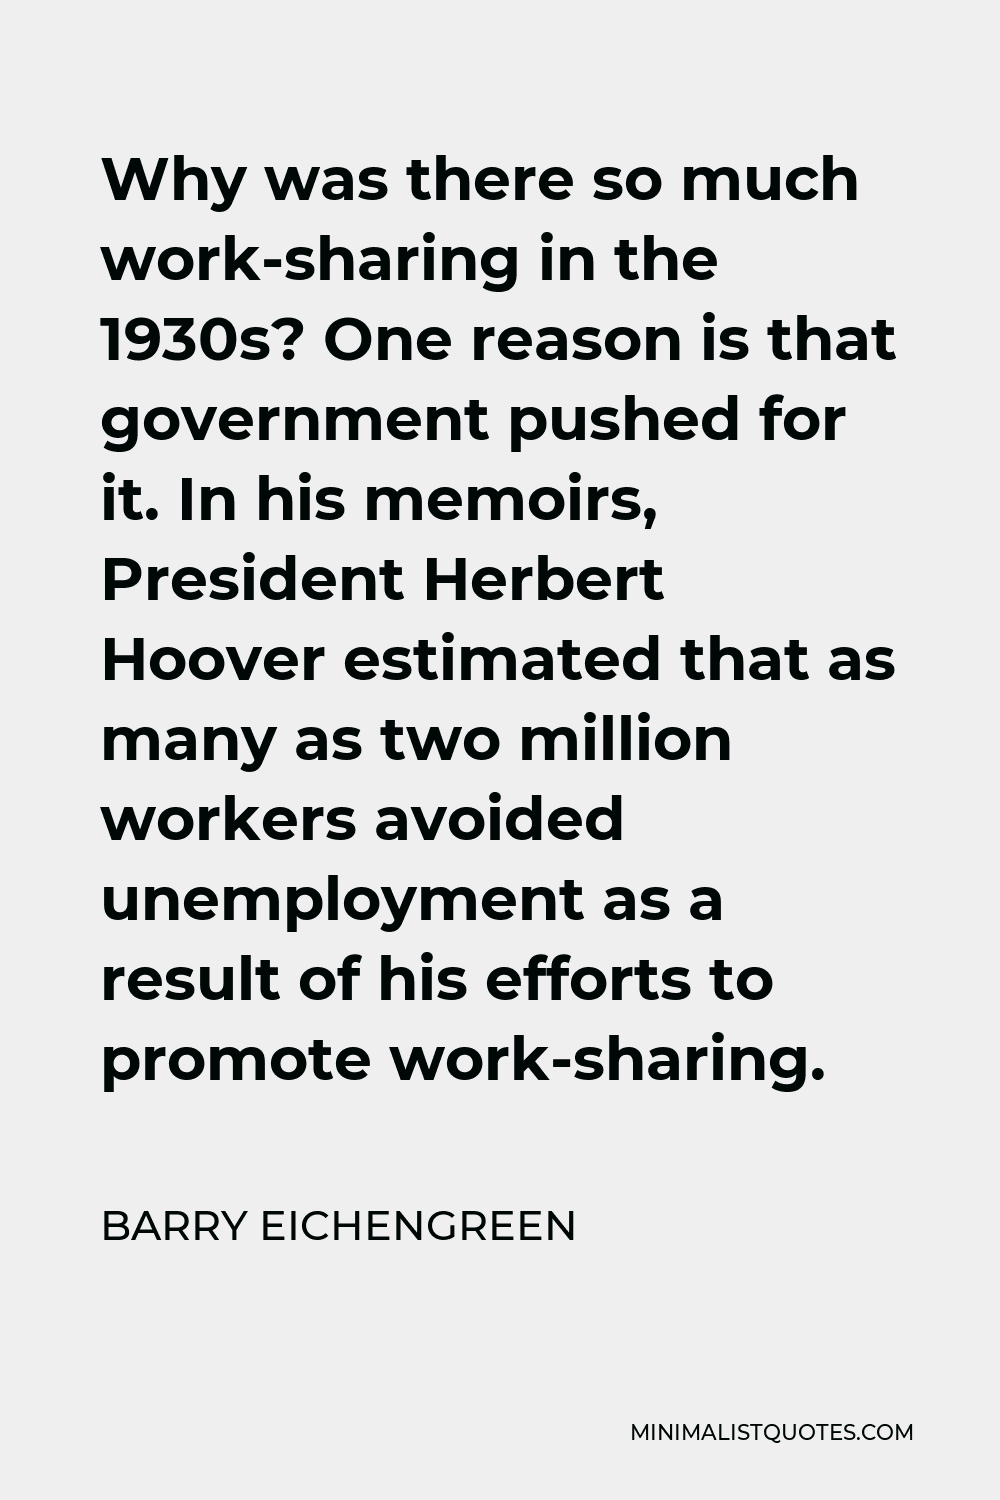 Barry Eichengreen Quote - Why was there so much work-sharing in the 1930s? One reason is that government pushed for it. In his memoirs, President Herbert Hoover estimated that as many as two million workers avoided unemployment as a result of his efforts to promote work-sharing.